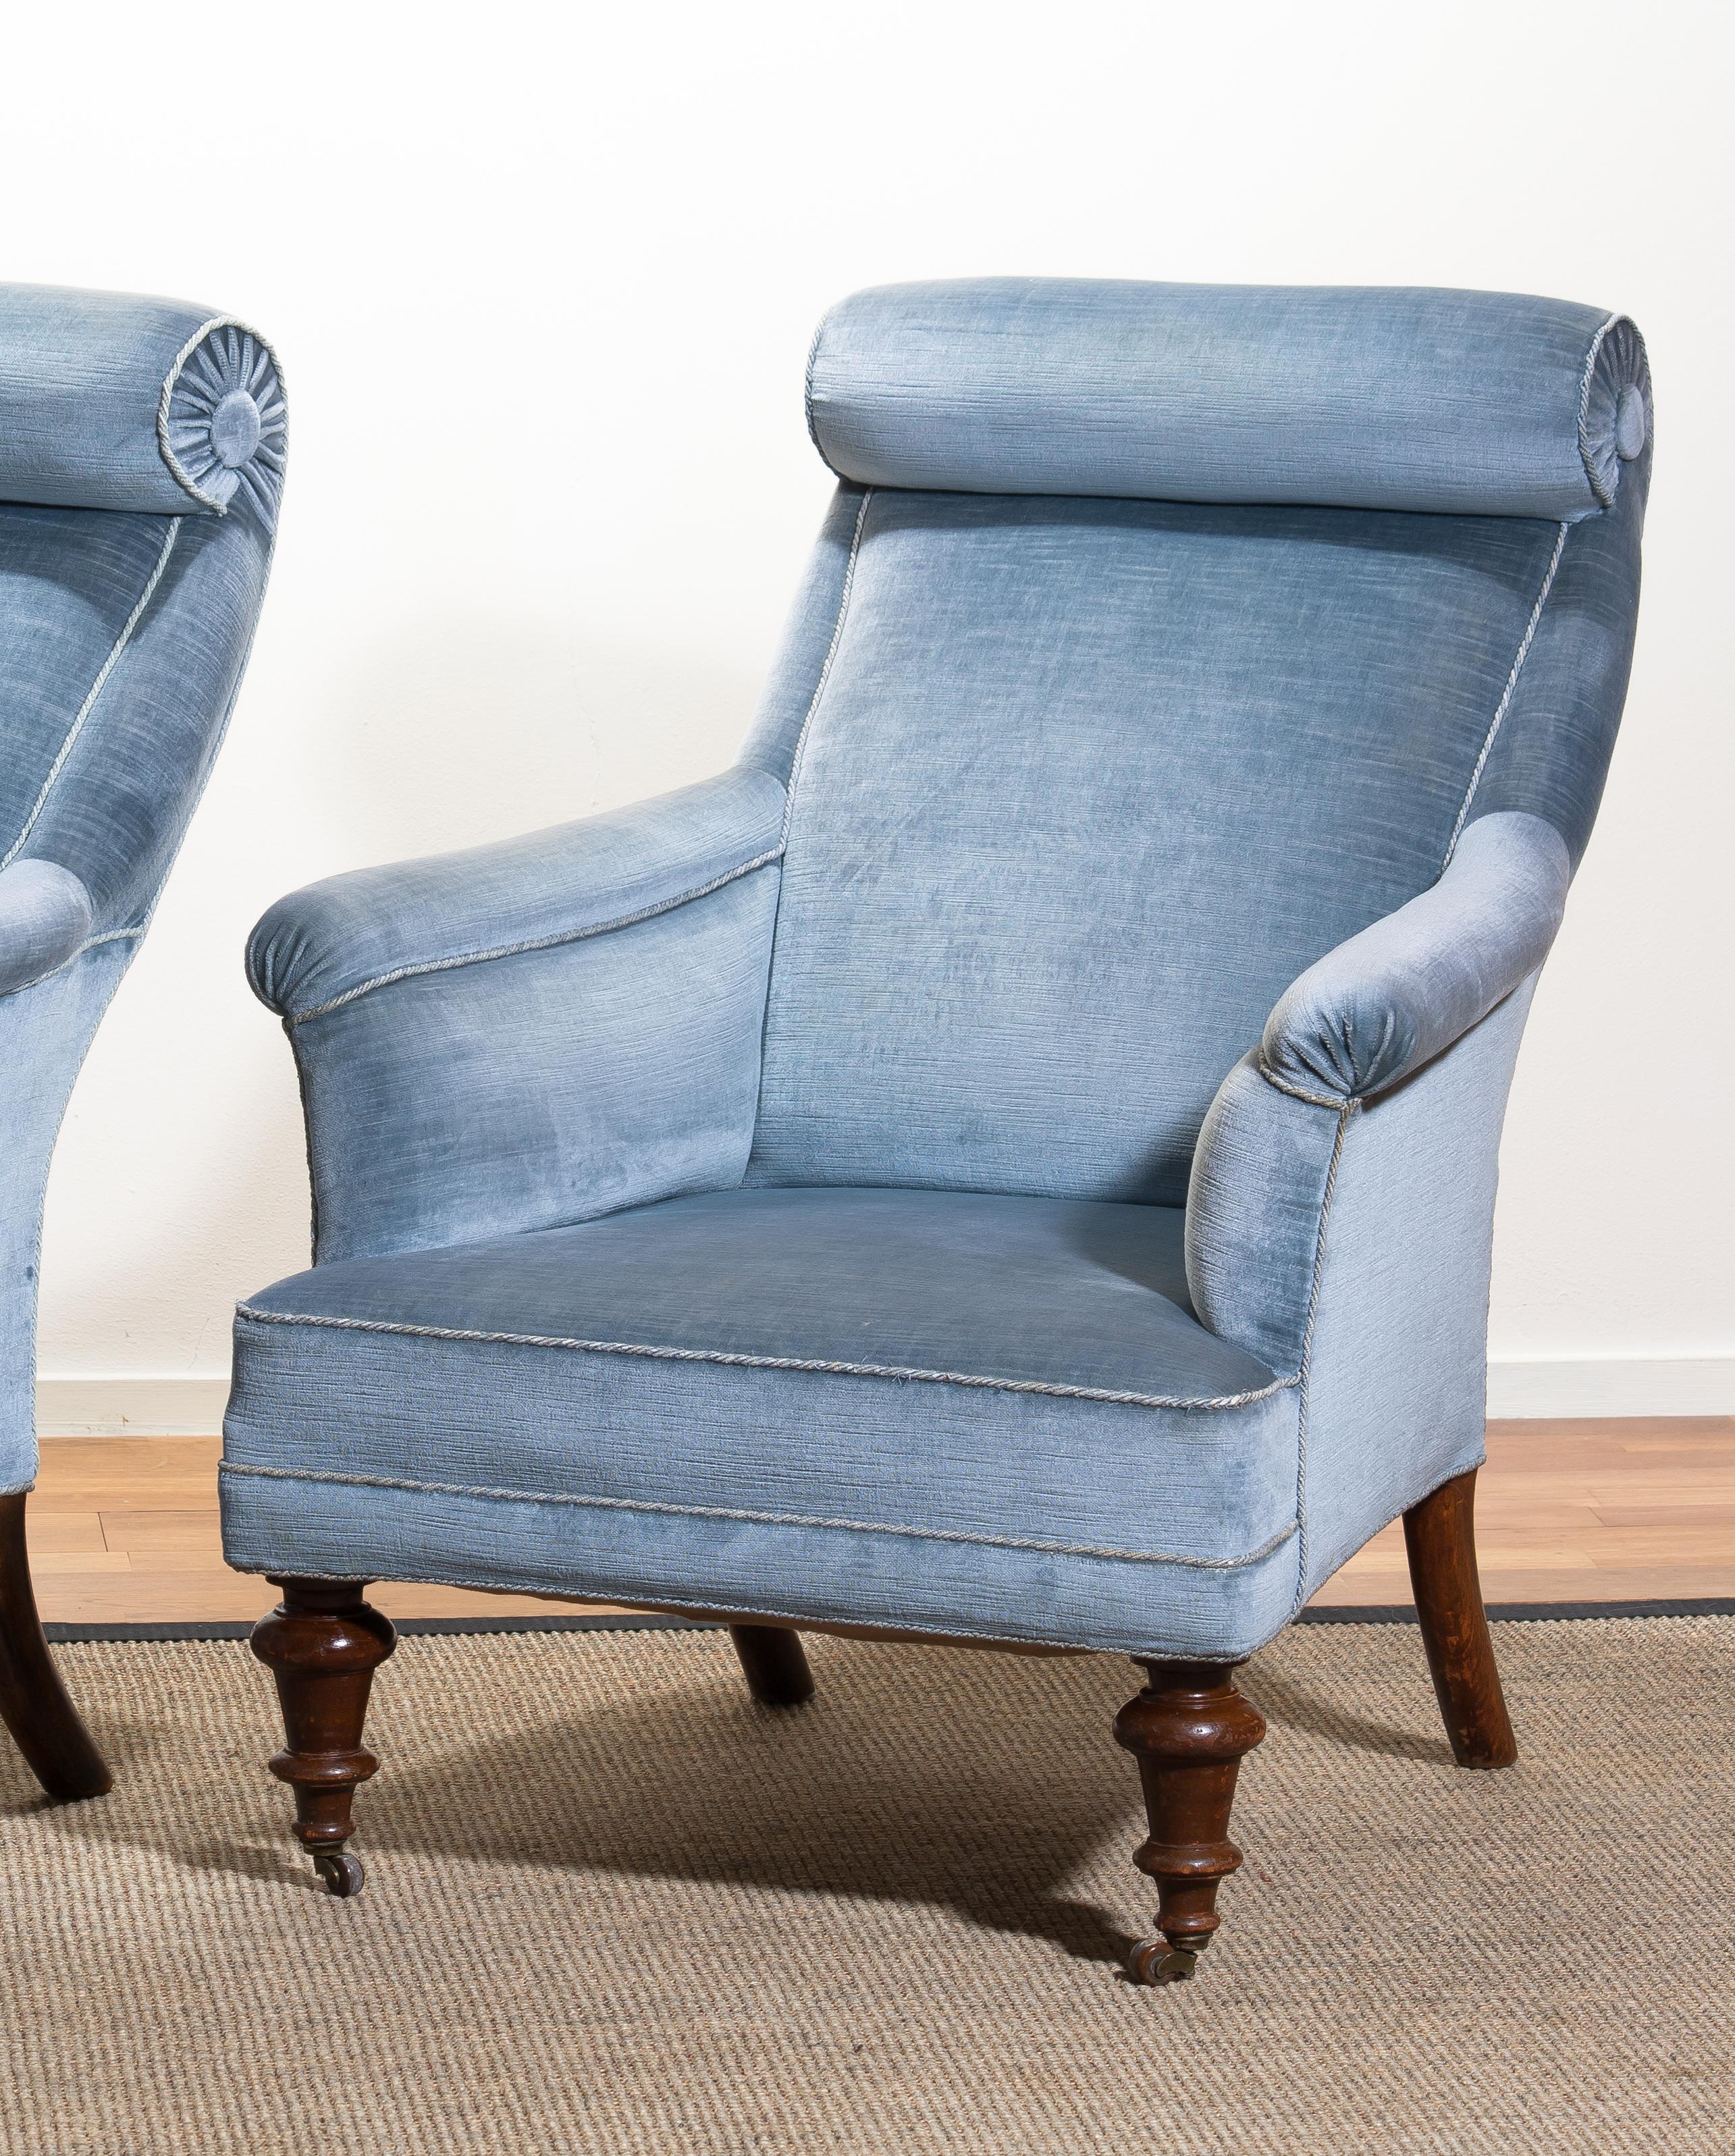 Early 20th Century 1900s Set of Two Ice Blue Velvet Dorothy Draper Style Bergère Club Lounge Chairs